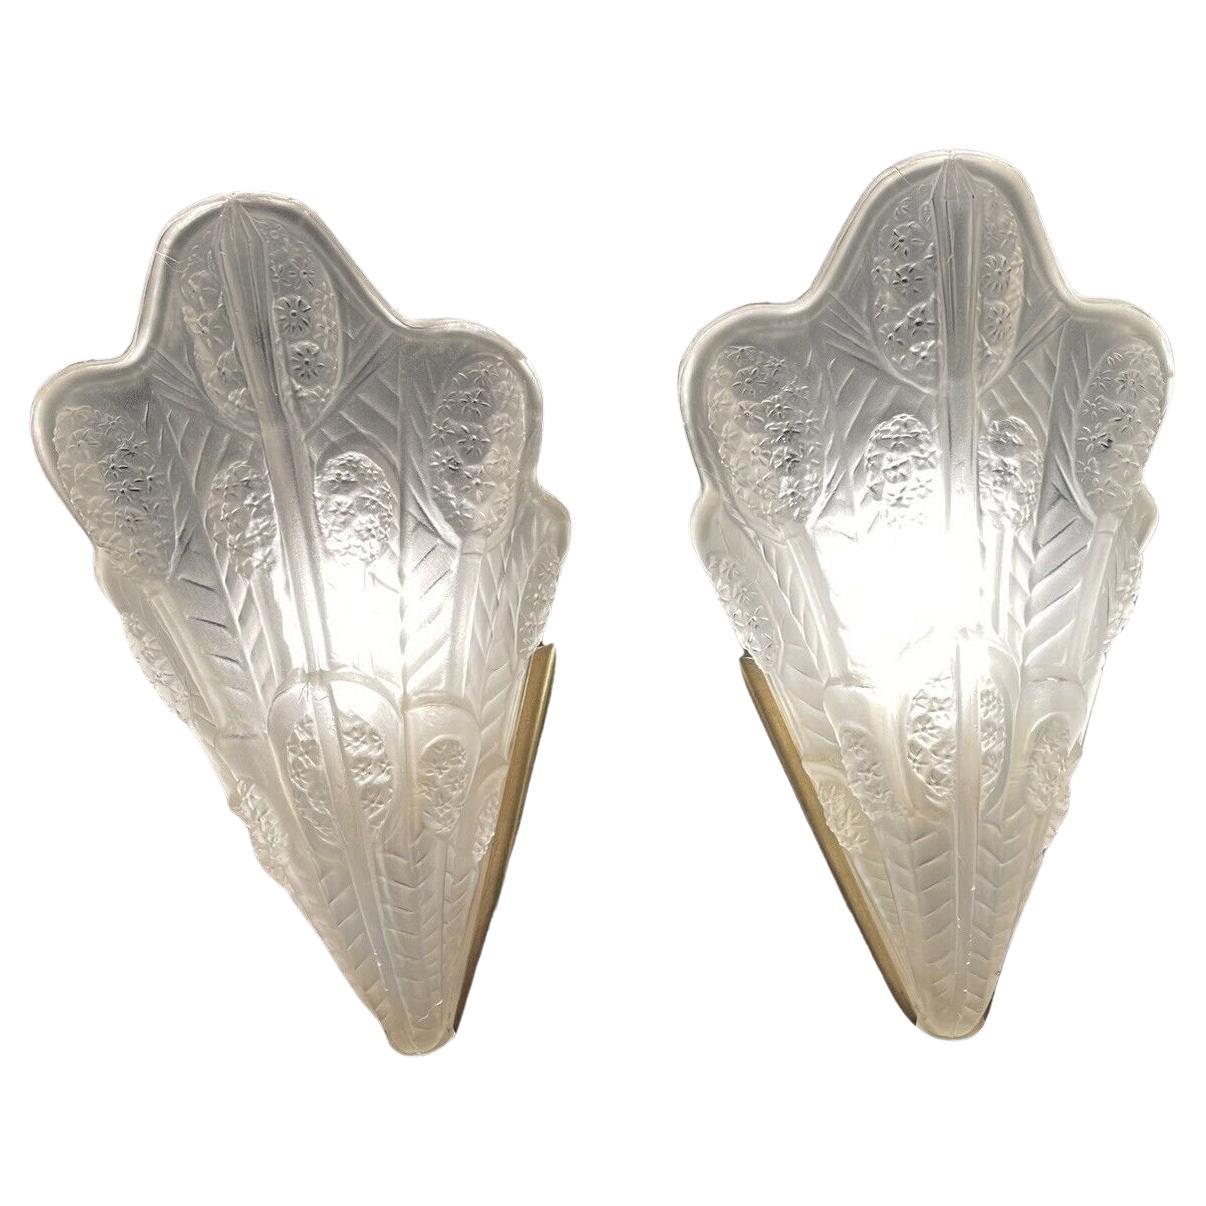 Art Deco Matching Pair of Wall Lights, 1930's, French